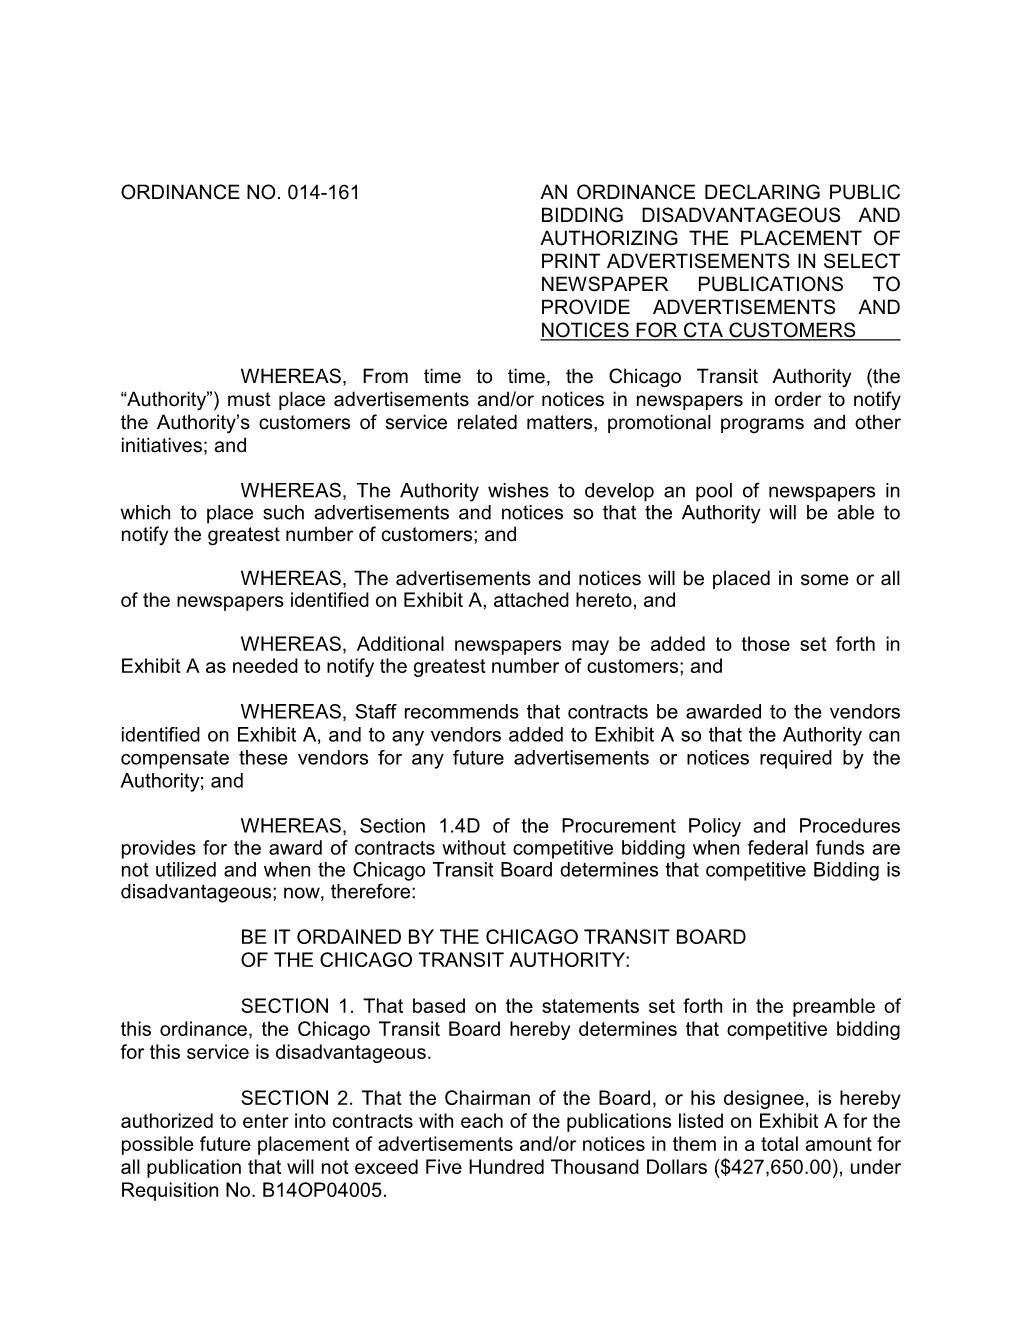 Ordinance No. 014-161 an Ordinance Declaring Public Bidding Disadvantageous and Authorizing the Placement of Print Advertisement